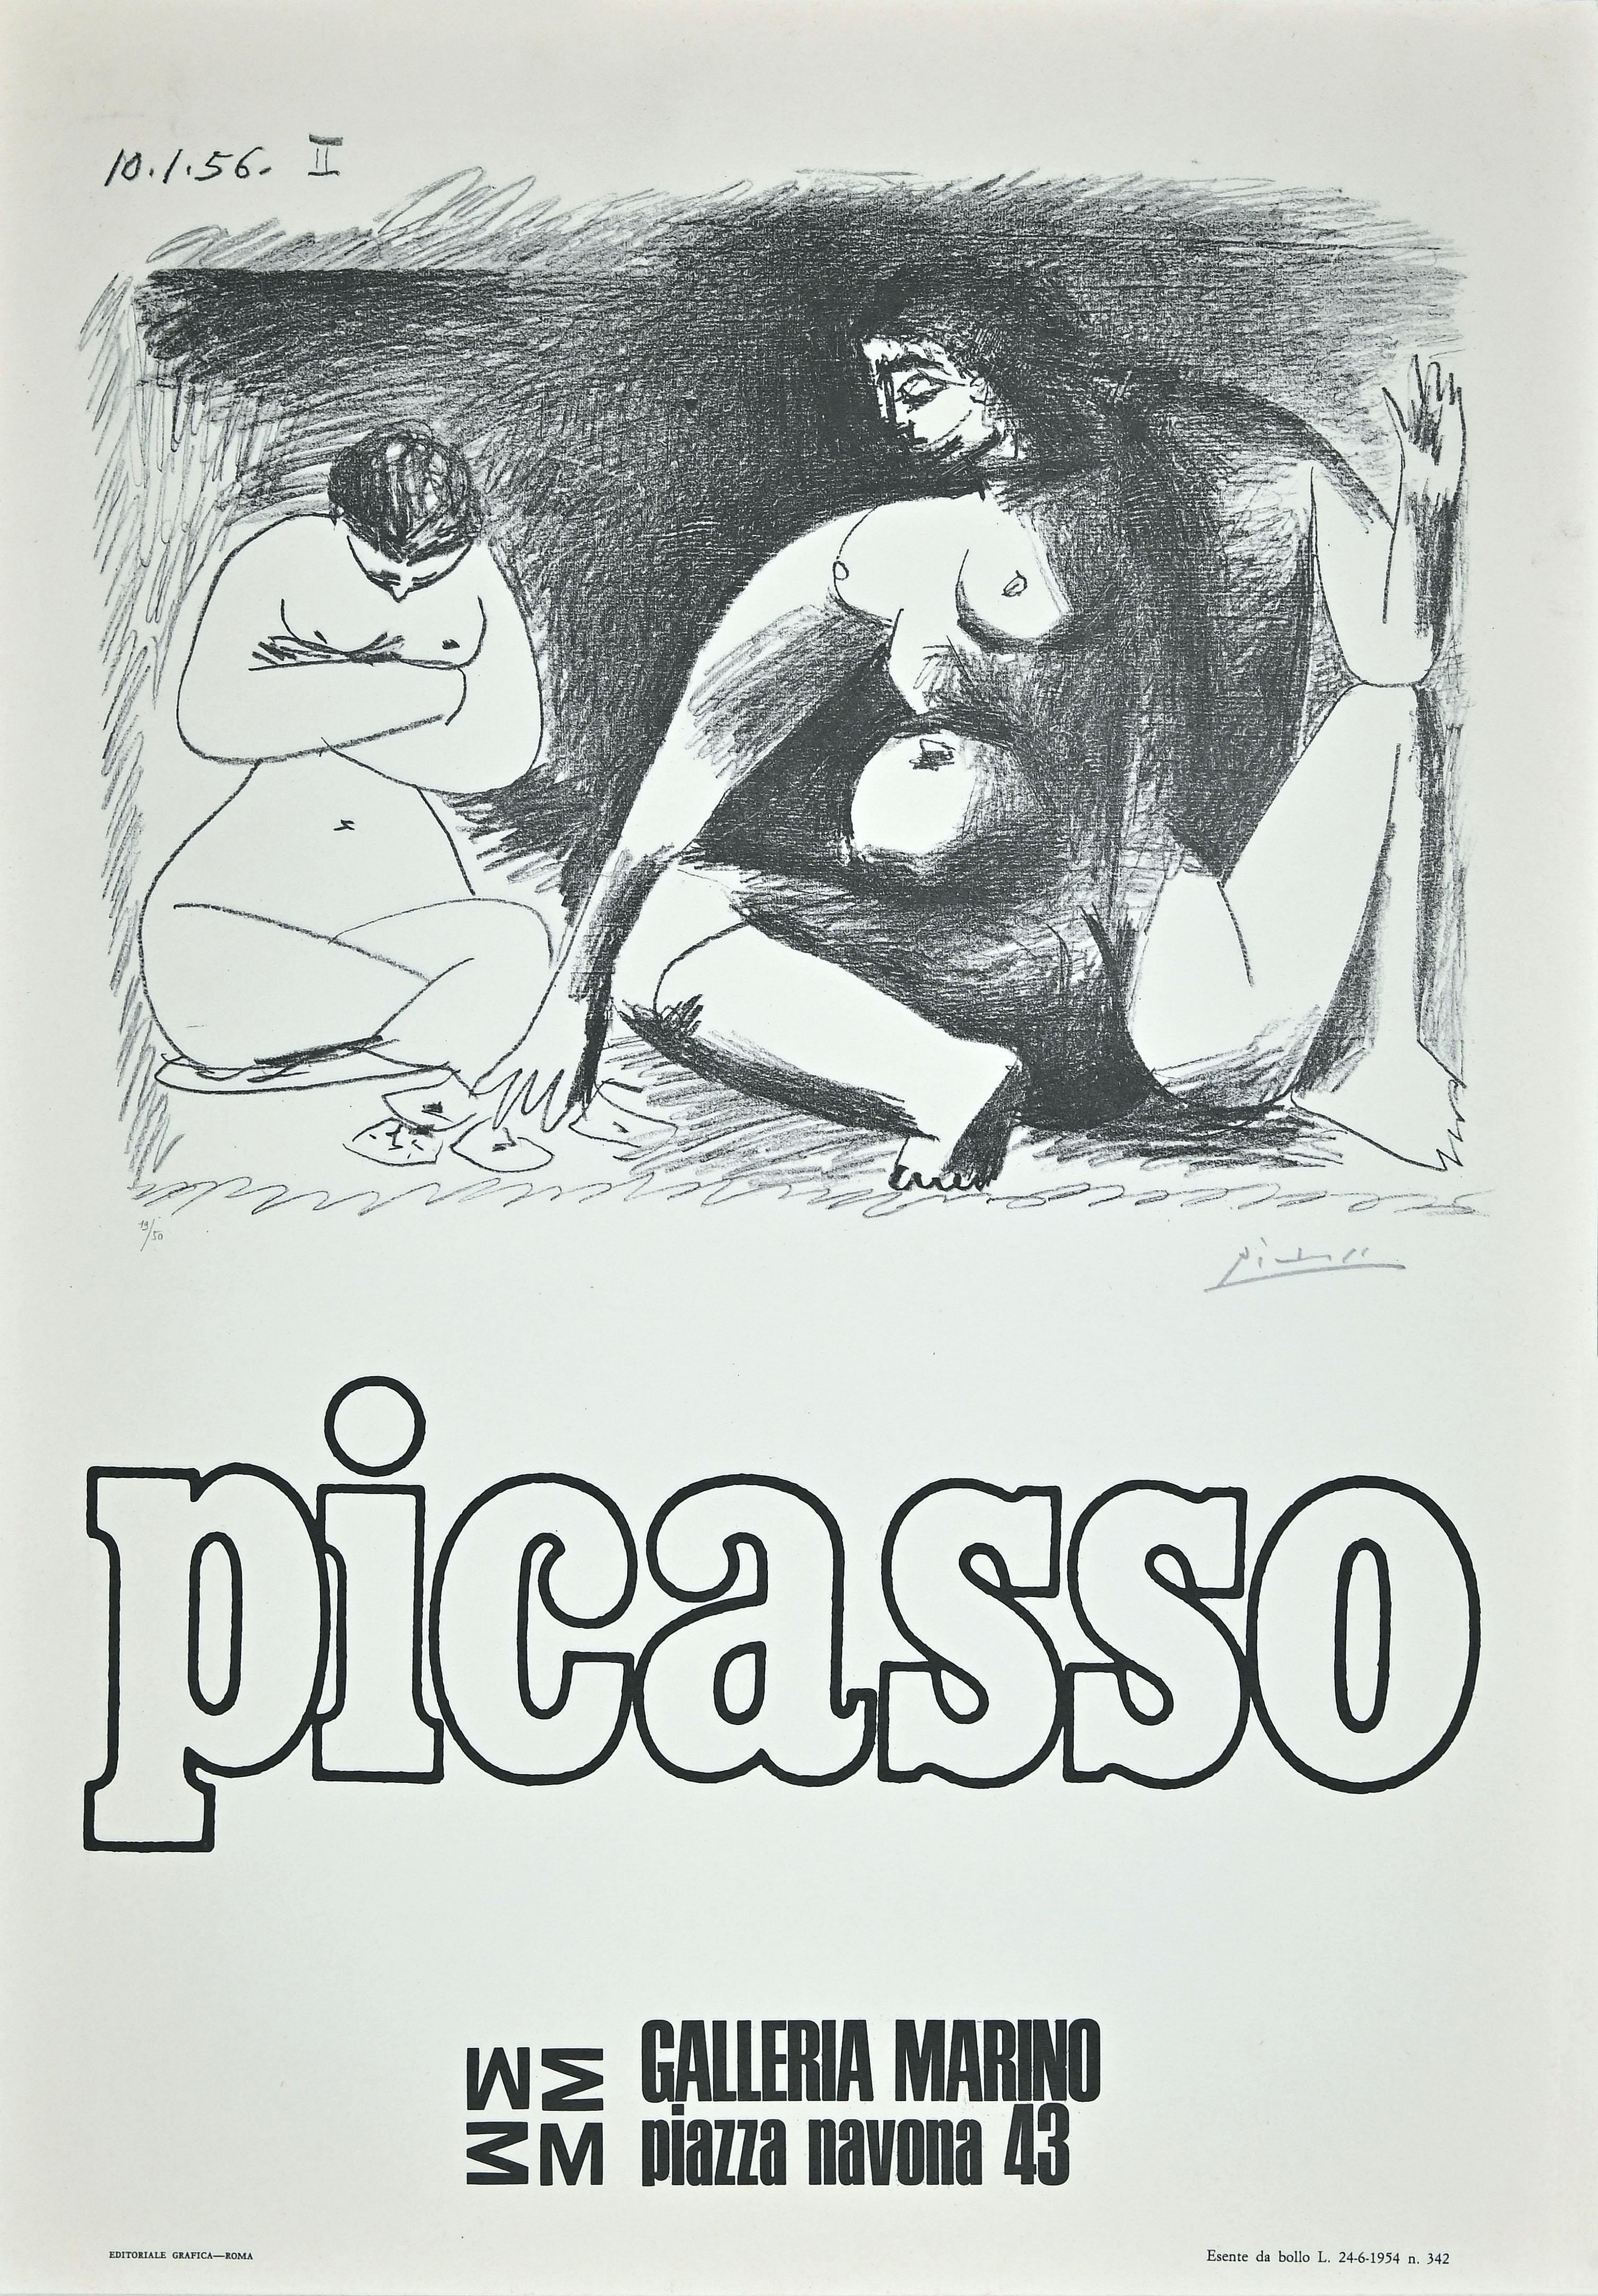 Picasso Exhibition Poster - Original Offset by Picasso (after) - 1974